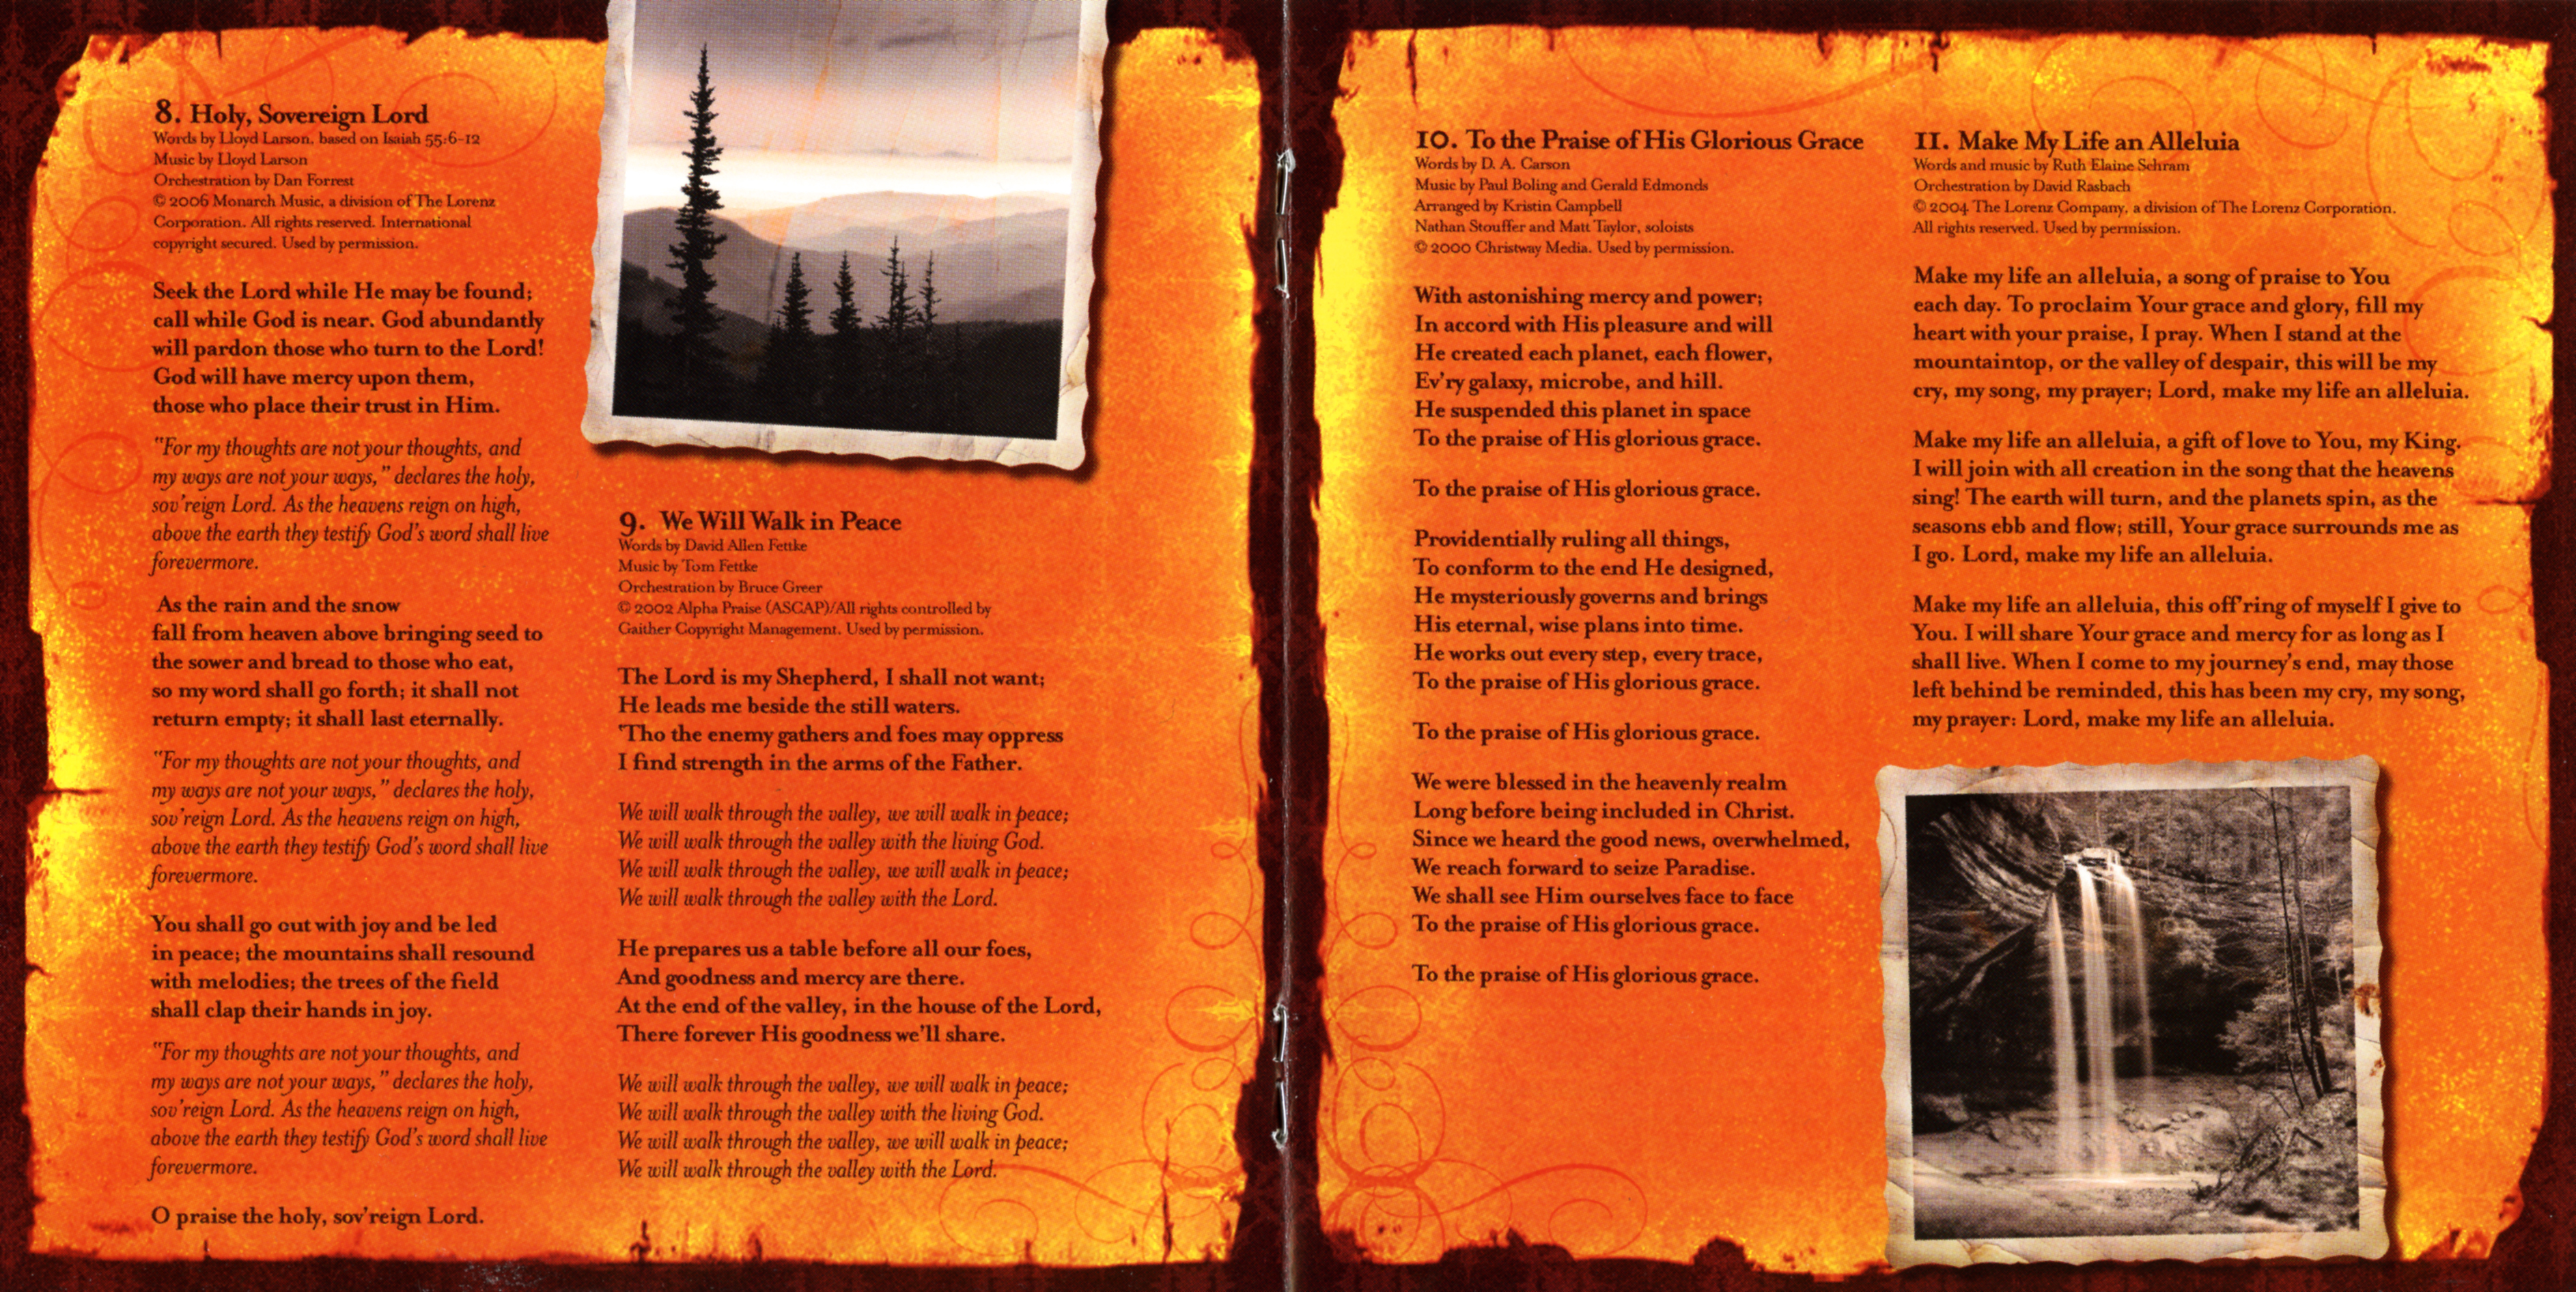 A_Quiet_Heart_The_Complete_CD_2006_Booklet_Side_5_To_6.jpg